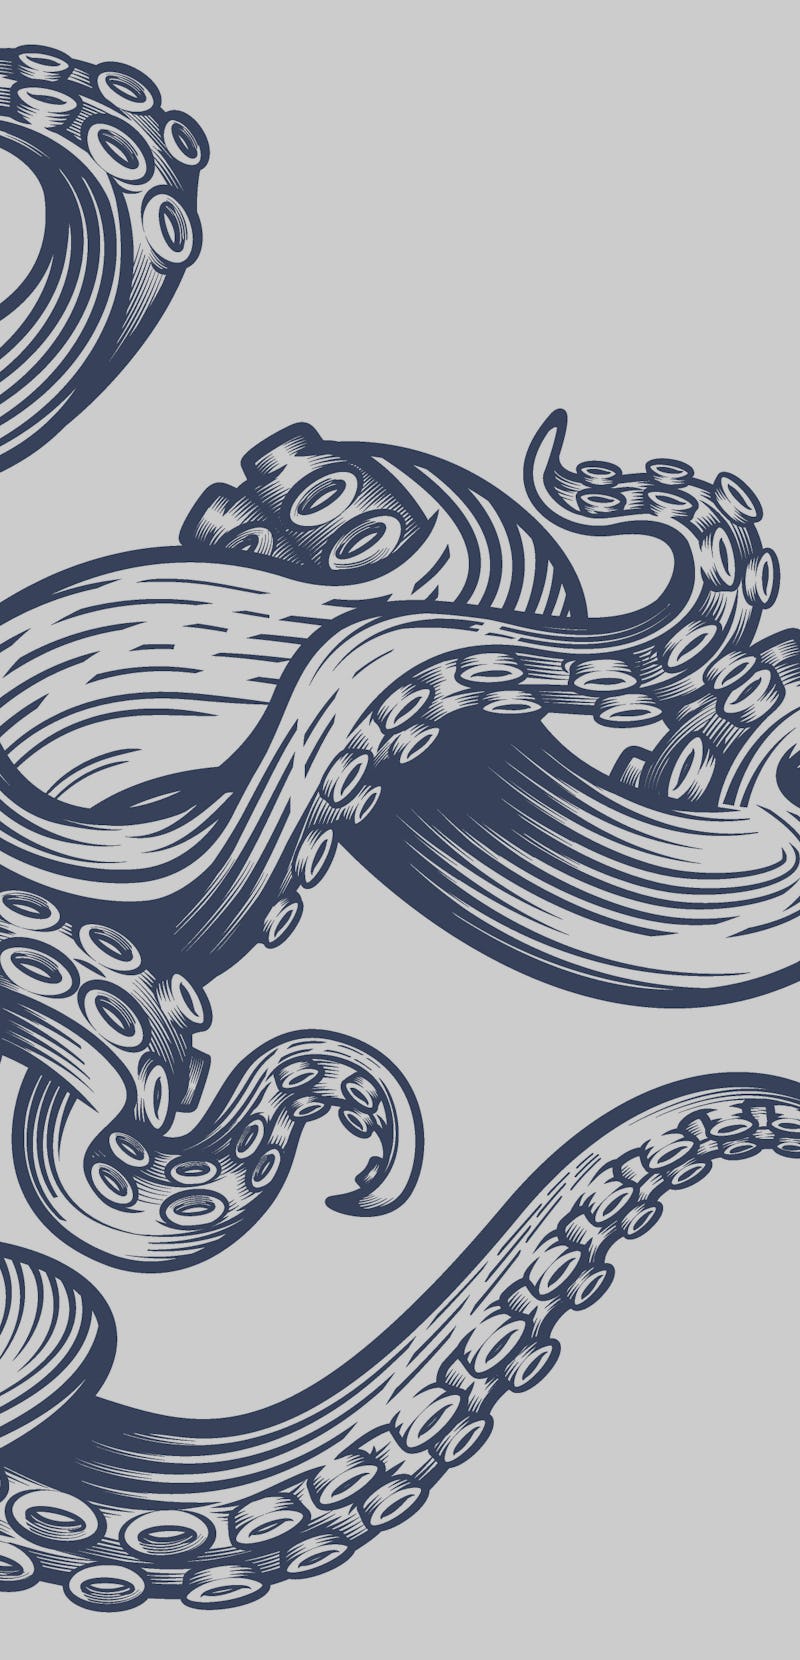 A manually created vector artwork featuring octopus tentacles, drawn in an engraving style 